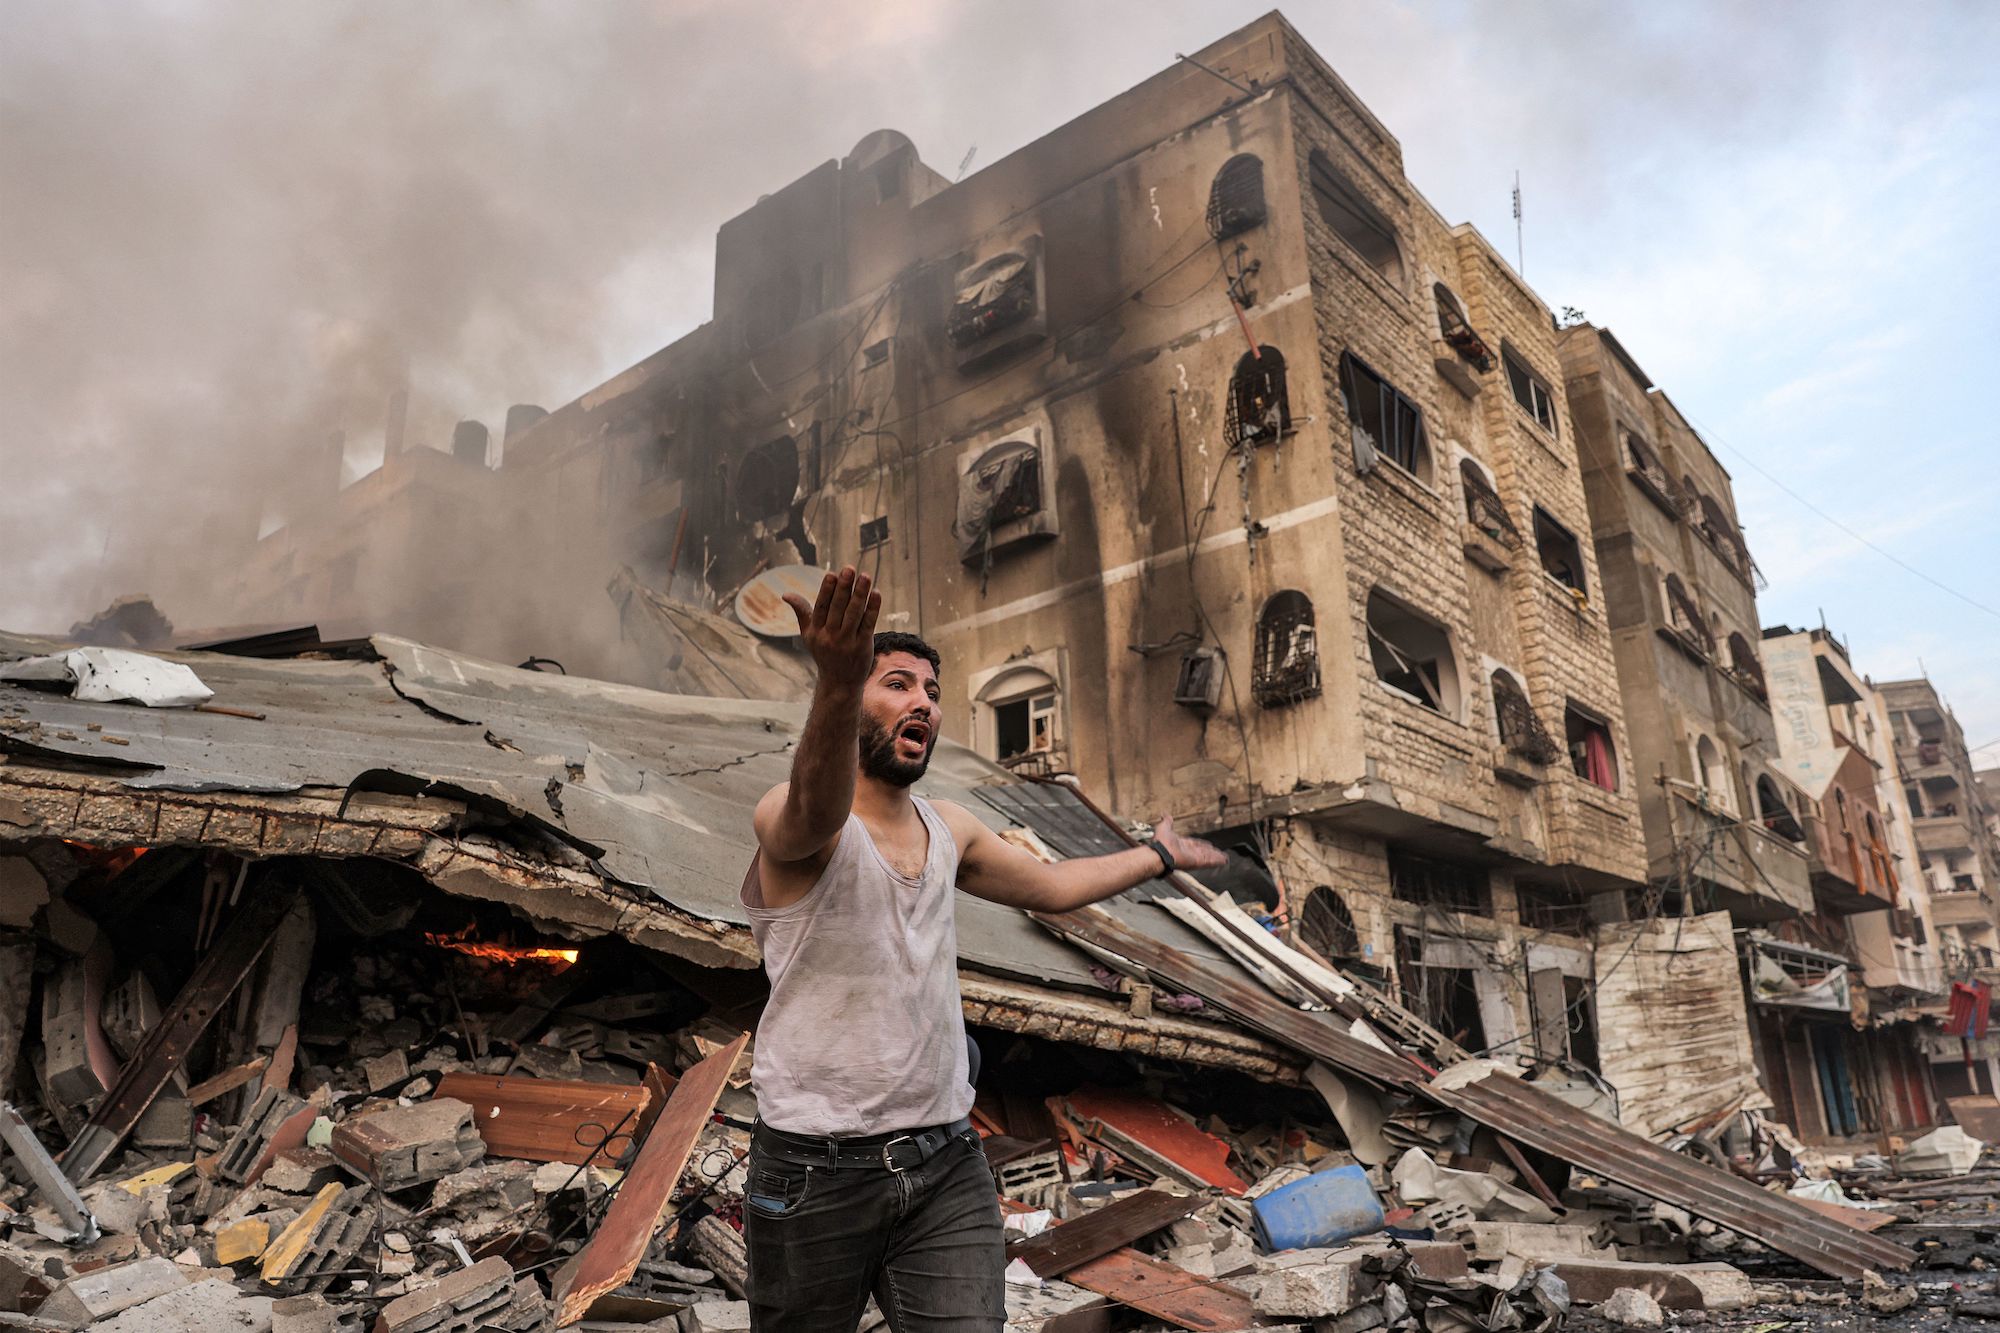 A man reacts outside a collapsed building following an Israeli bombardment in Gaza City on Wednesday.